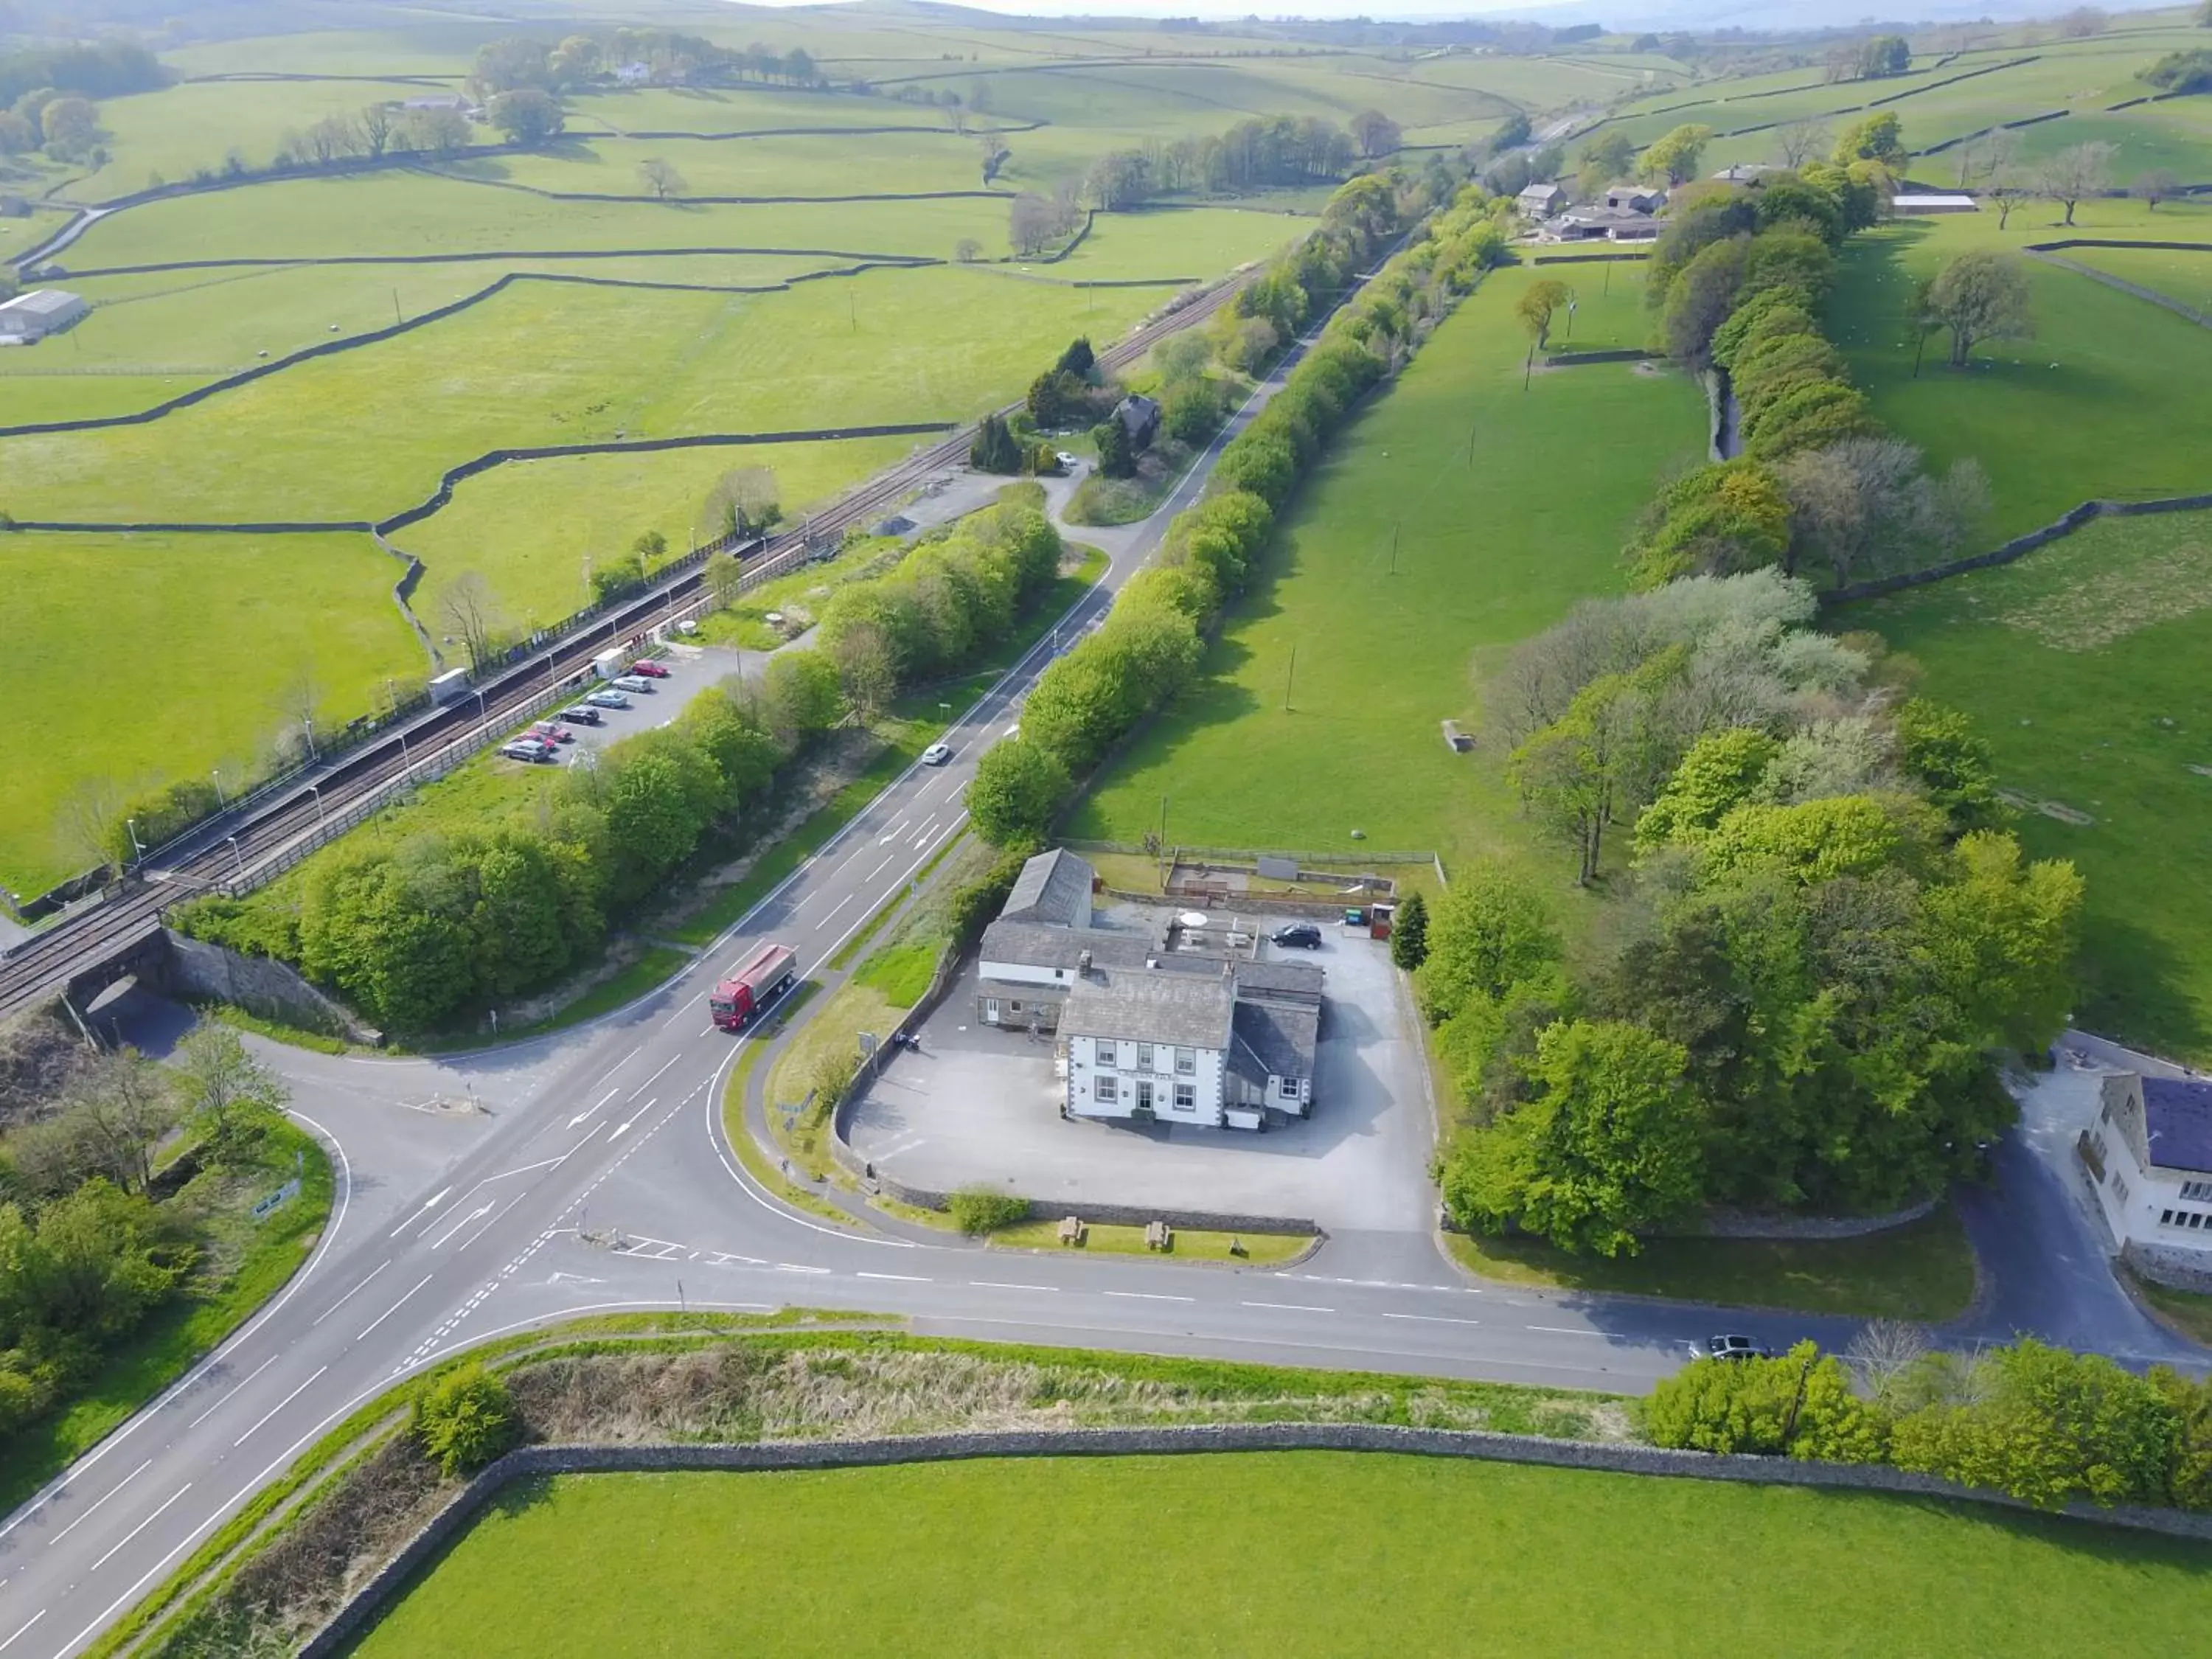 Landmark view, Bird's-eye View in The Craven Arms